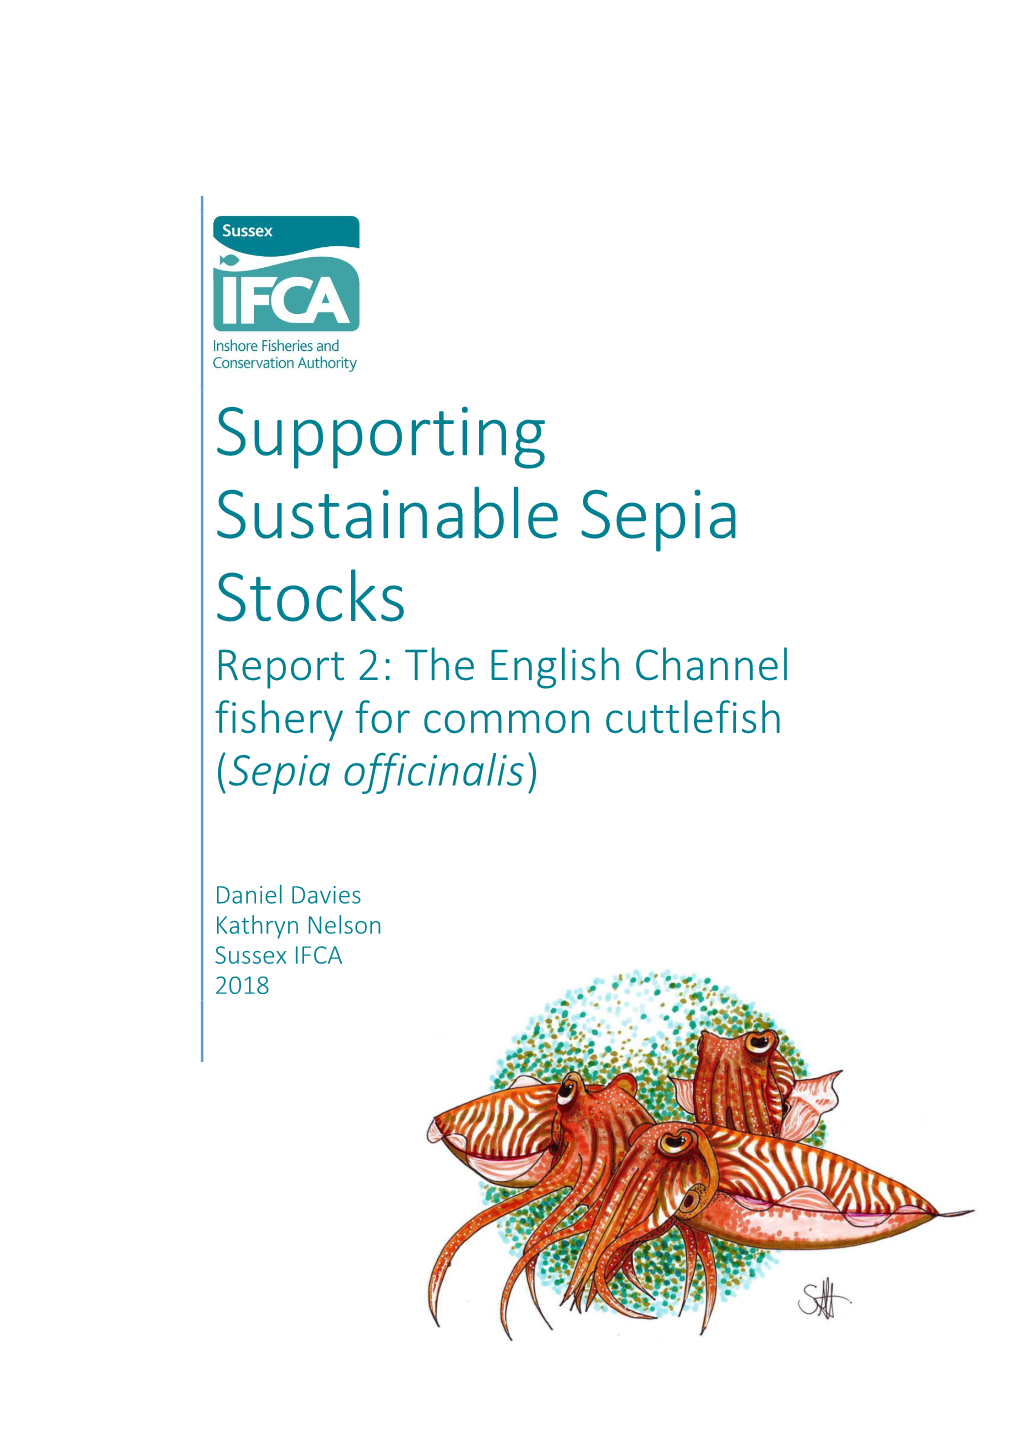 Supporting Sustainable Sepia Stocks Report 2: the English Channel Fishery for Common Cuttlefish (Sepia Officinalis)